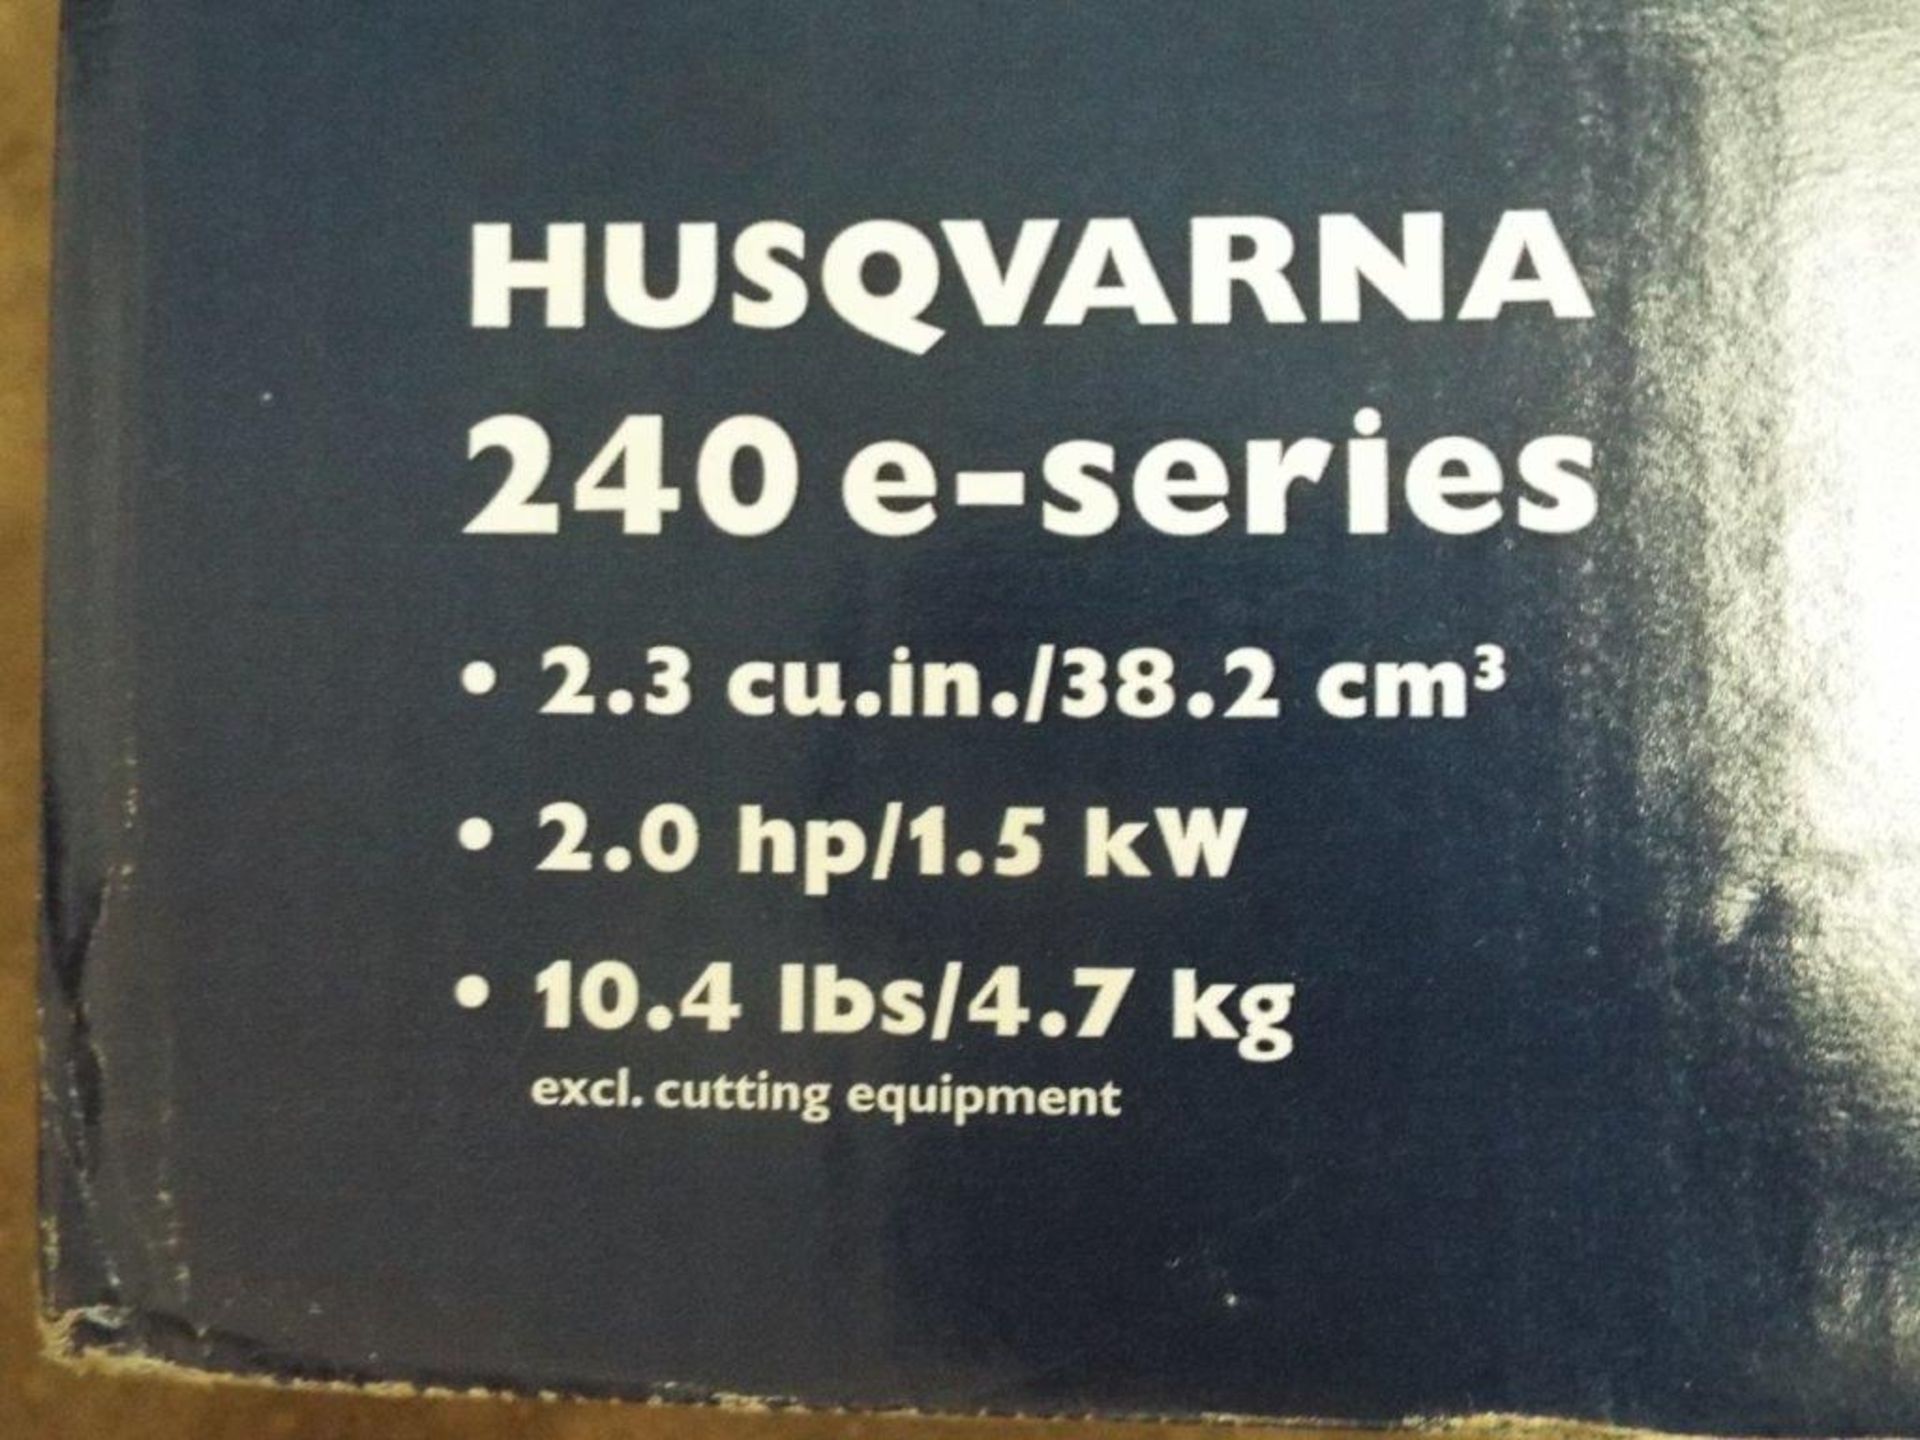 New Unused Husqvarna 240 E-Series Chainsaw with 16" Blade - Image 4 of 9